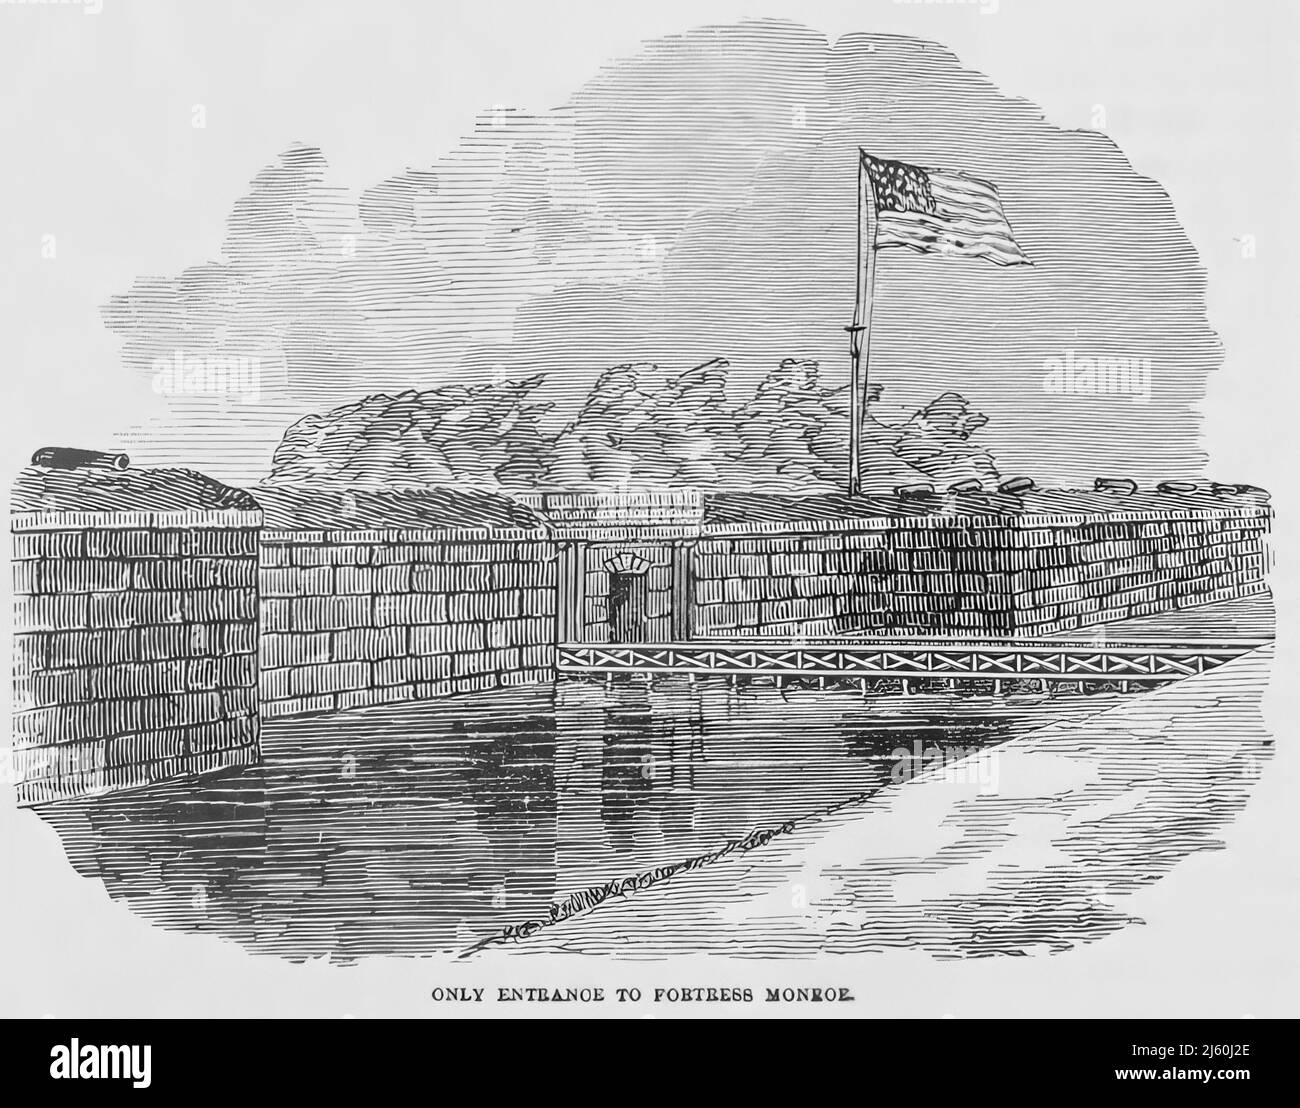 Only Entrance to Fort Monroe, in the American Civil War. 19th century illustration Stock Photo